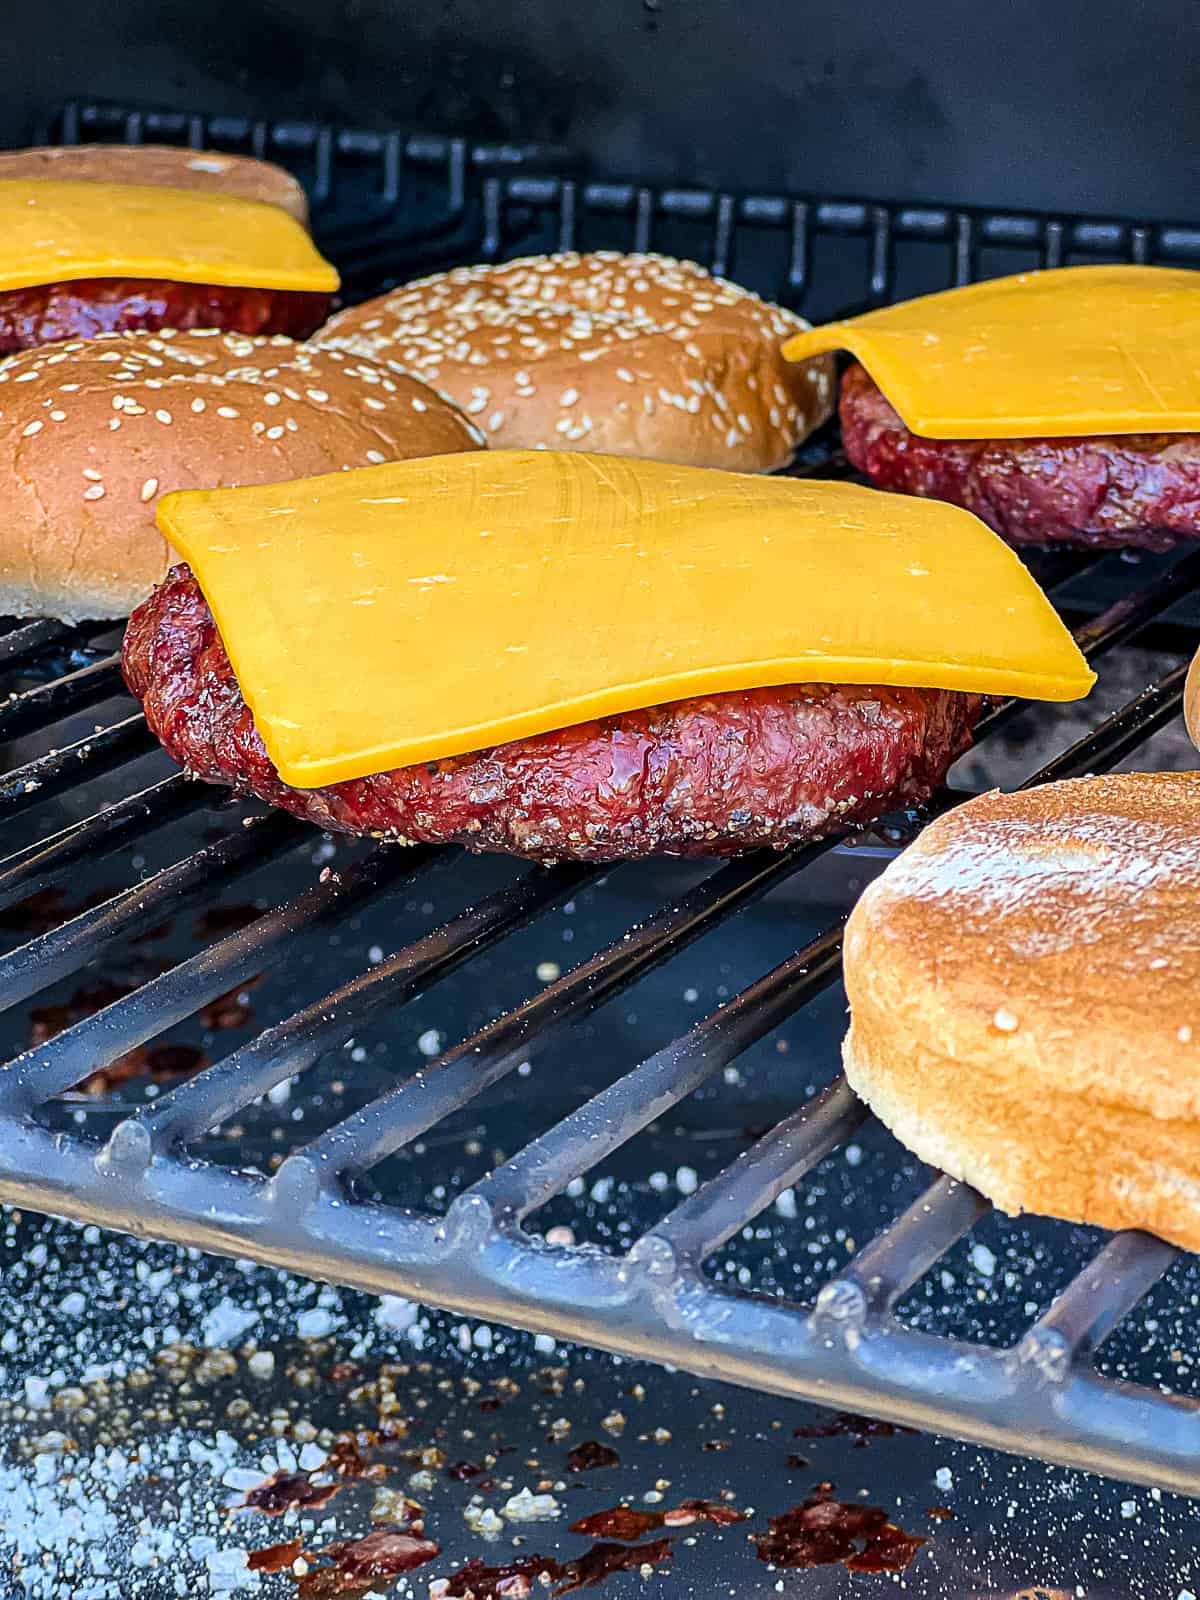 Smoked burgers on the Traeger pellet grill for a backyard BBQ food option